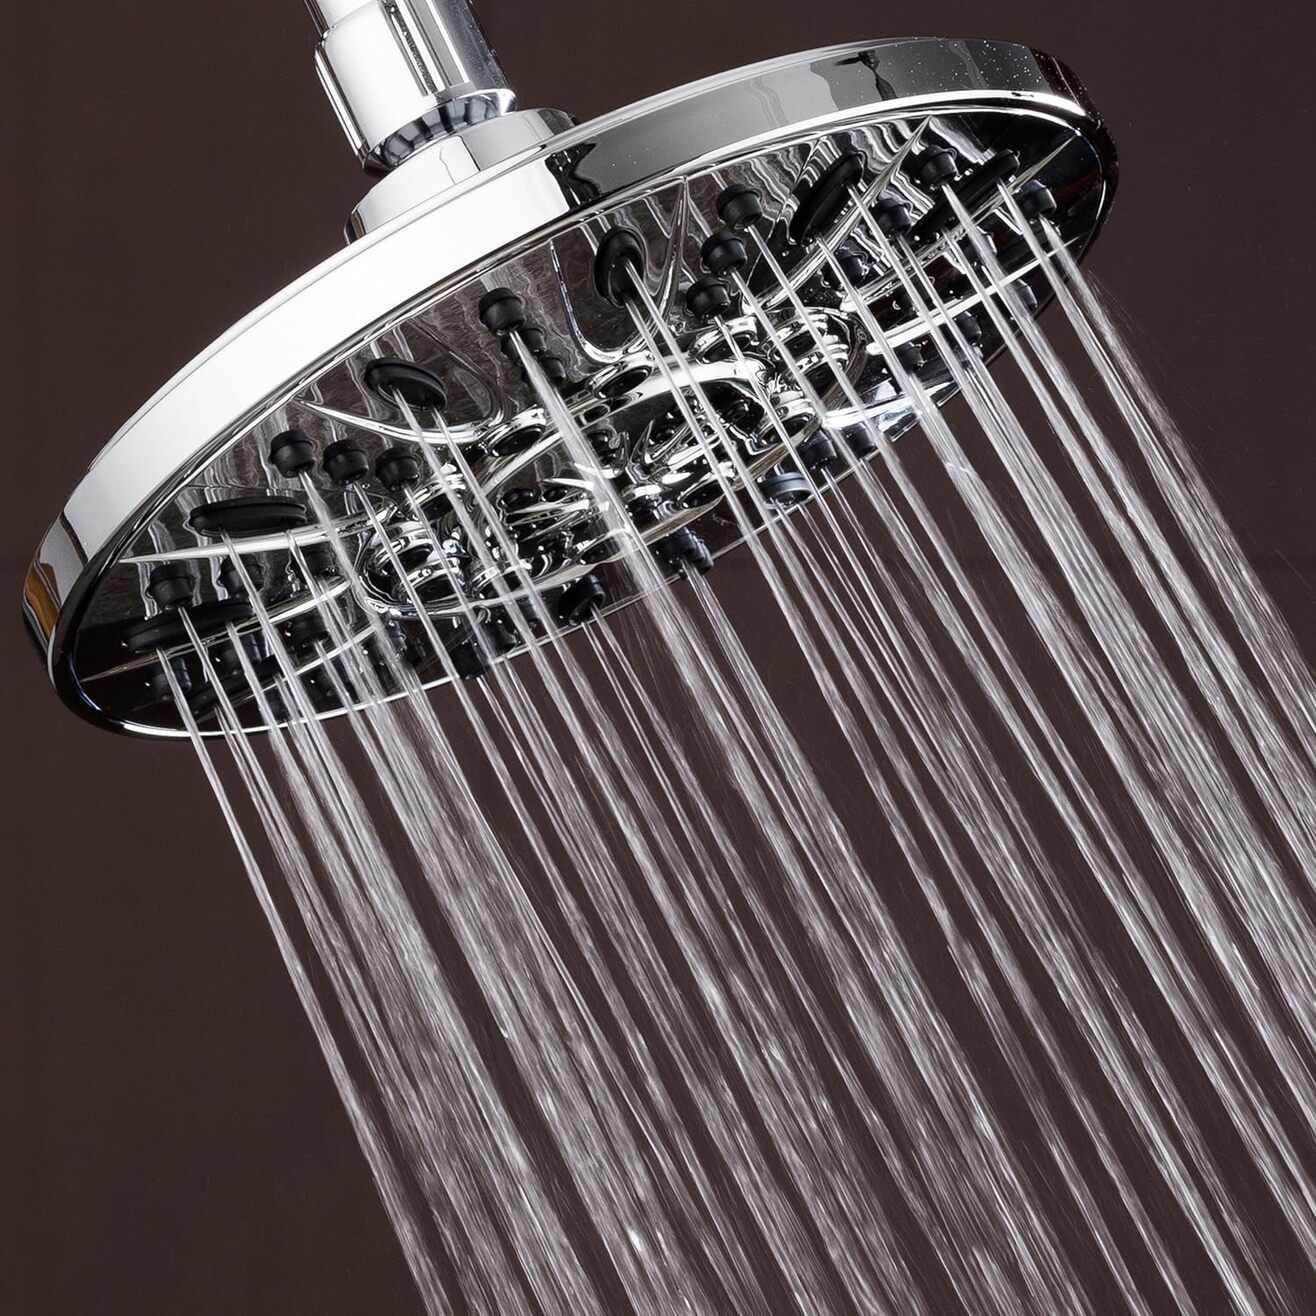 The-10-Best-Handheld-Shower-Head-with-Slide-Bar-Reviews-&-Buying-Guide-TN